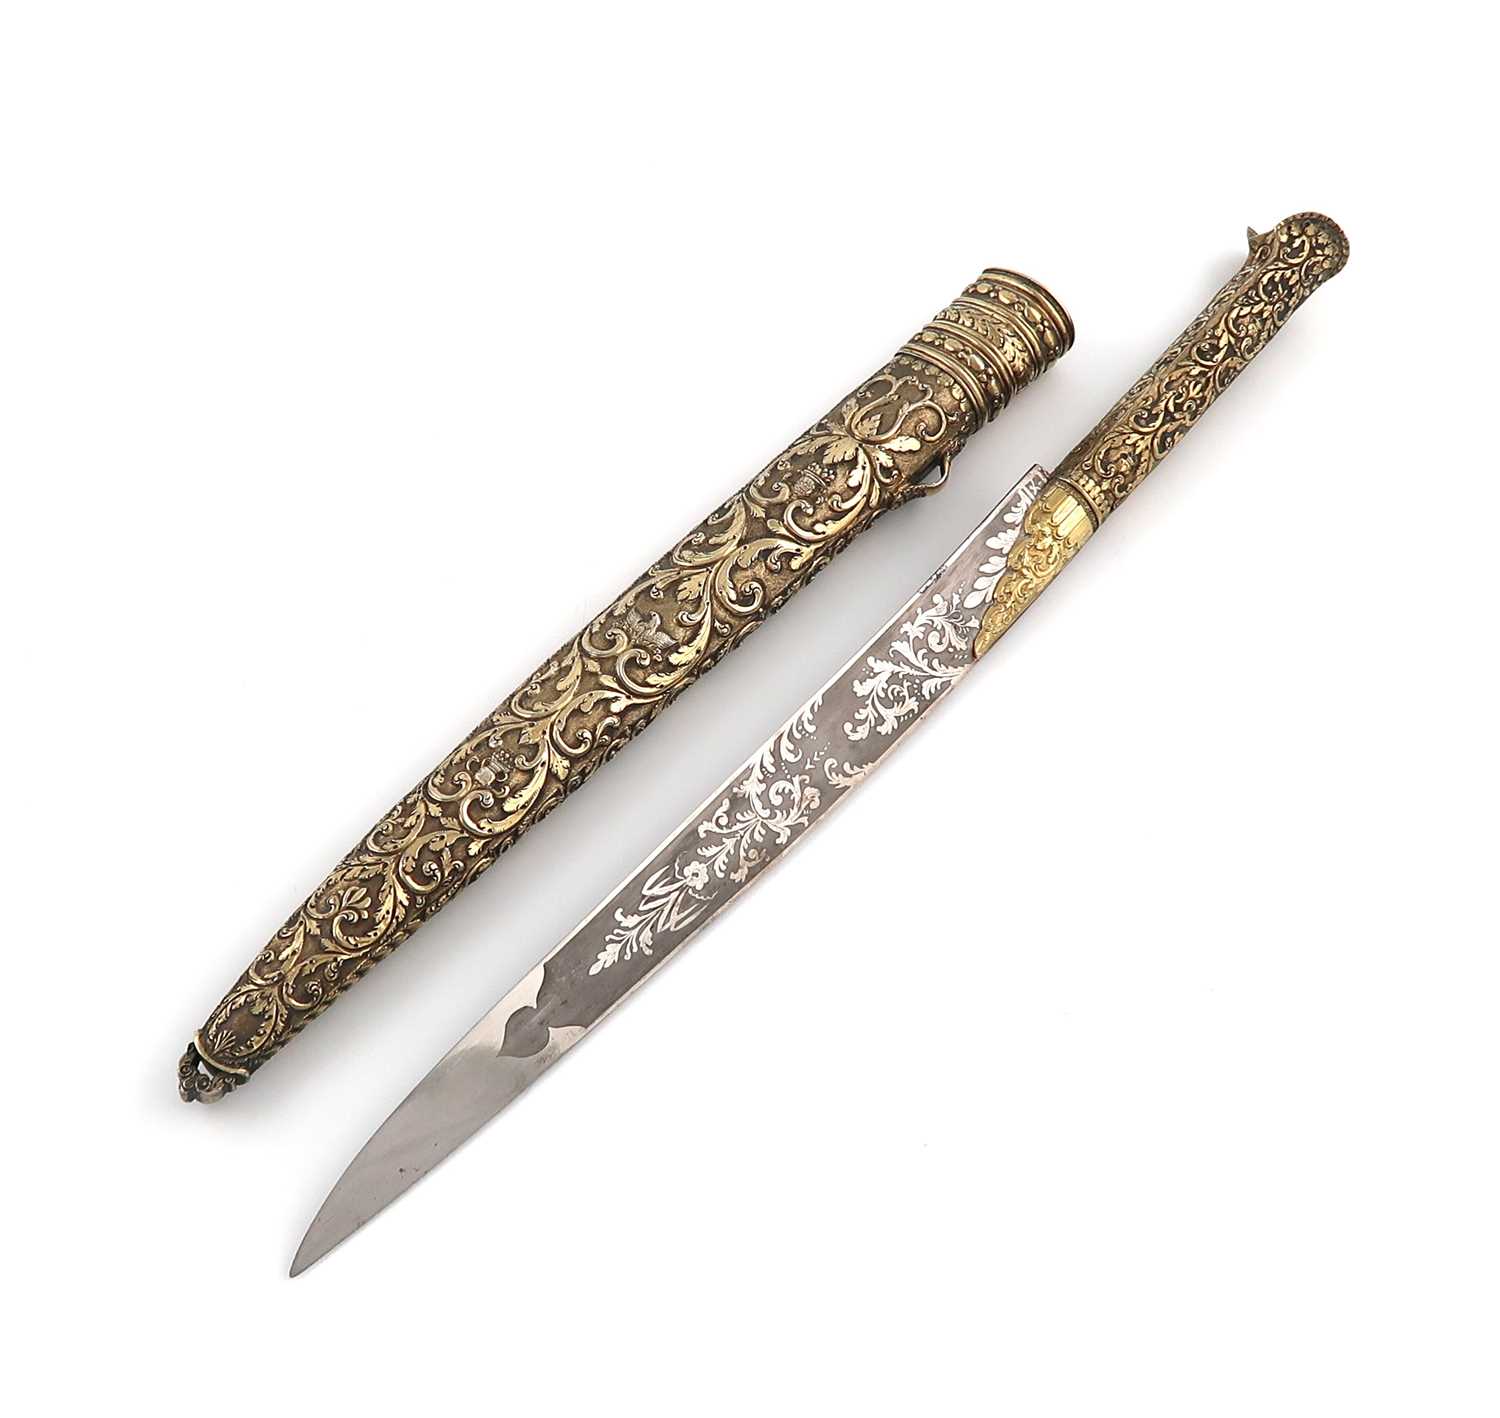 An early-Victorian silver-gilt handled dagger and sheath,by Joseph Willmore, Birmingham 1843,with